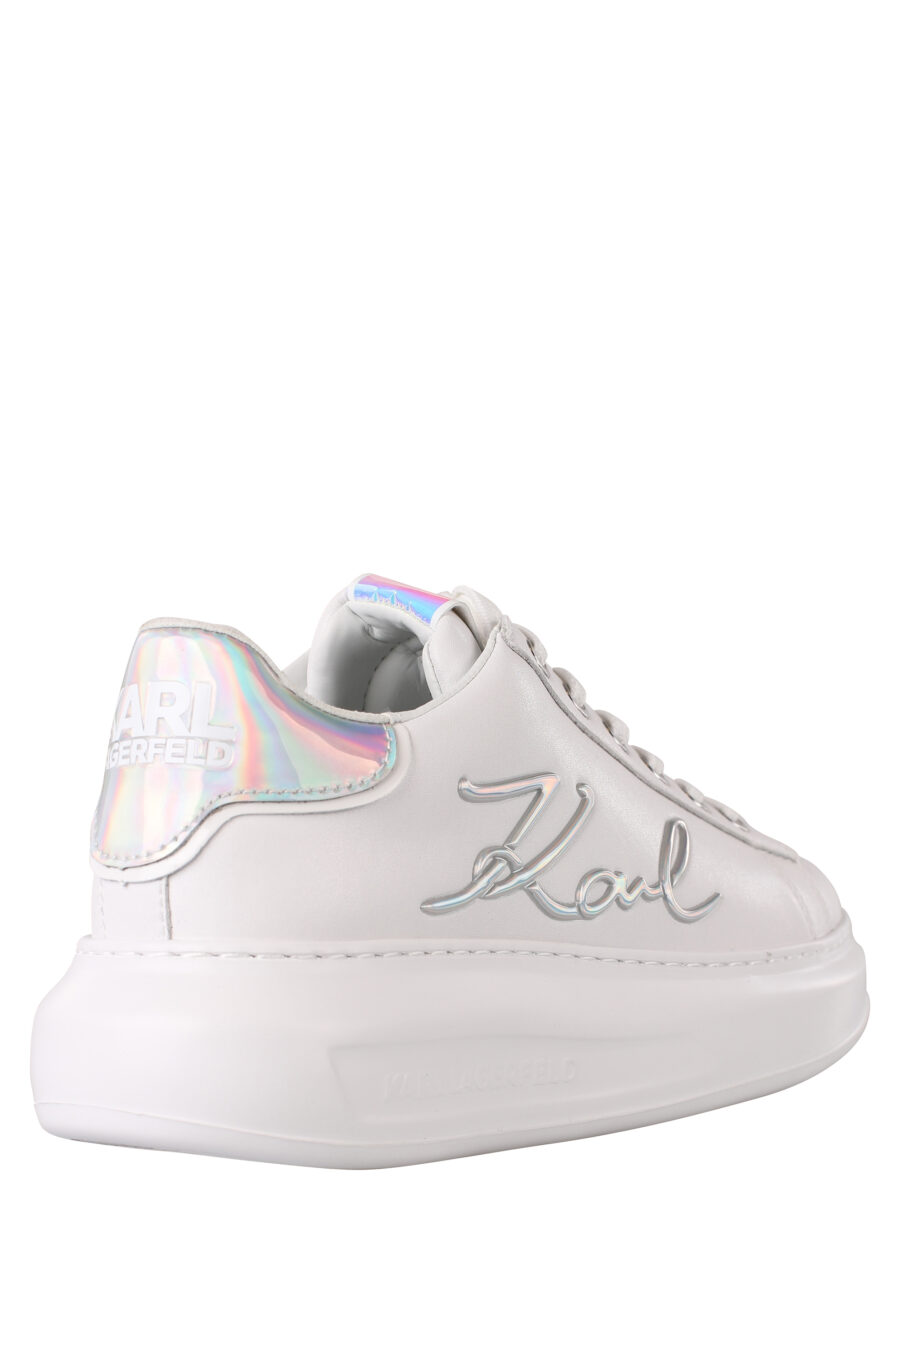 White trainers with white logo and iridescent detail - IMG 1357